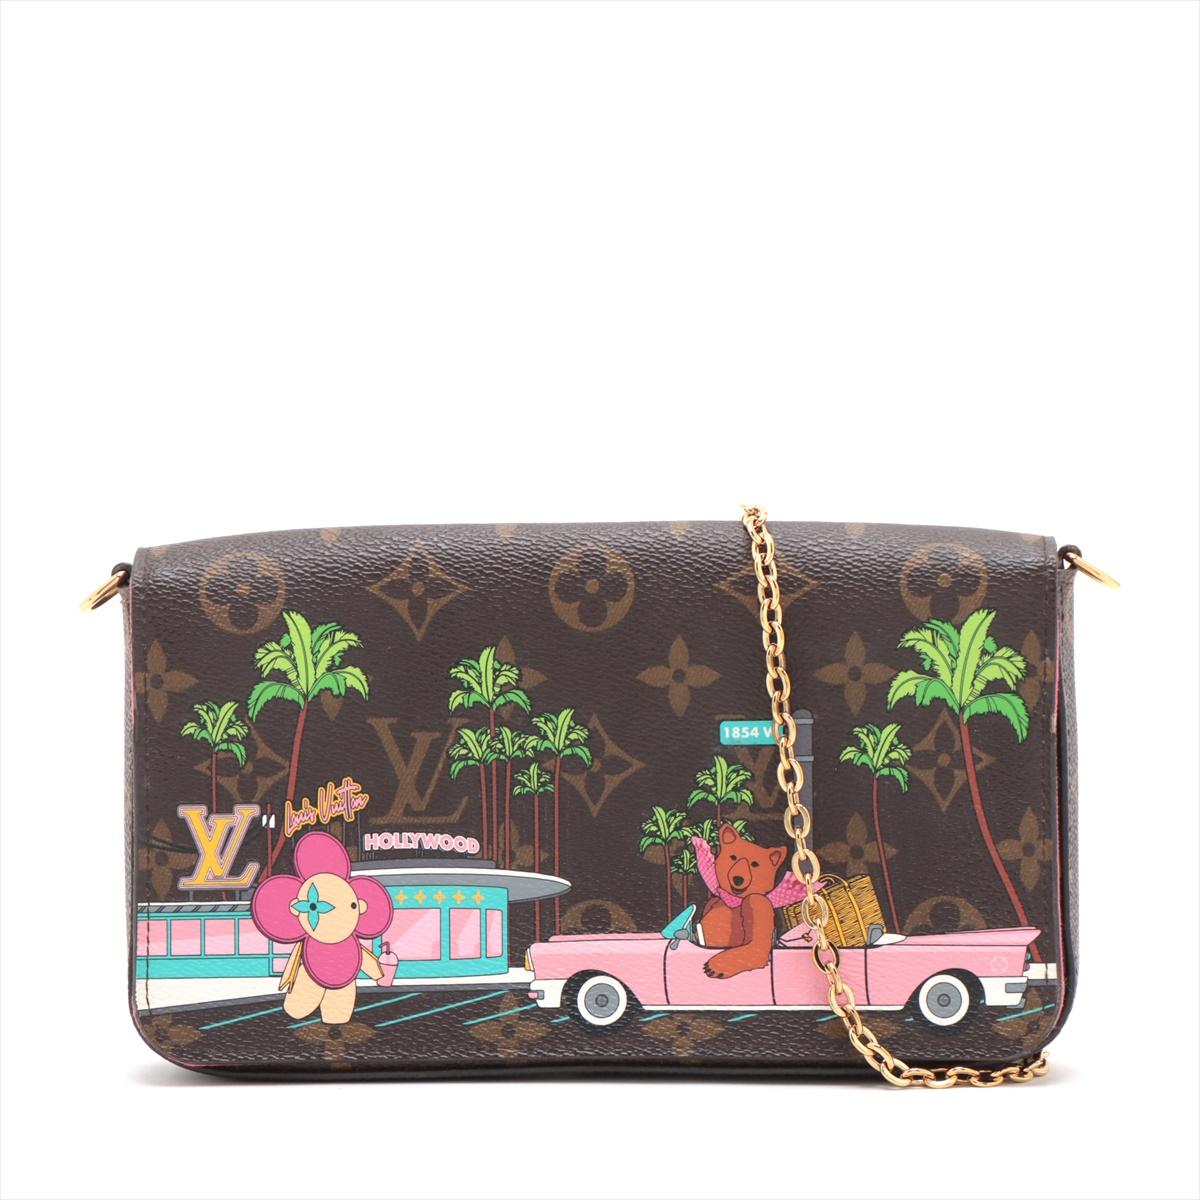 The Louis Vuitton Monogram Pochette Felicie Vivienne in Hollywood Fuchsia Pink is a captivating accessory that seamlessly combines style and functionality. Adorned with the iconic Monogram canvas, the pochette showcases the renowned LV pattern,